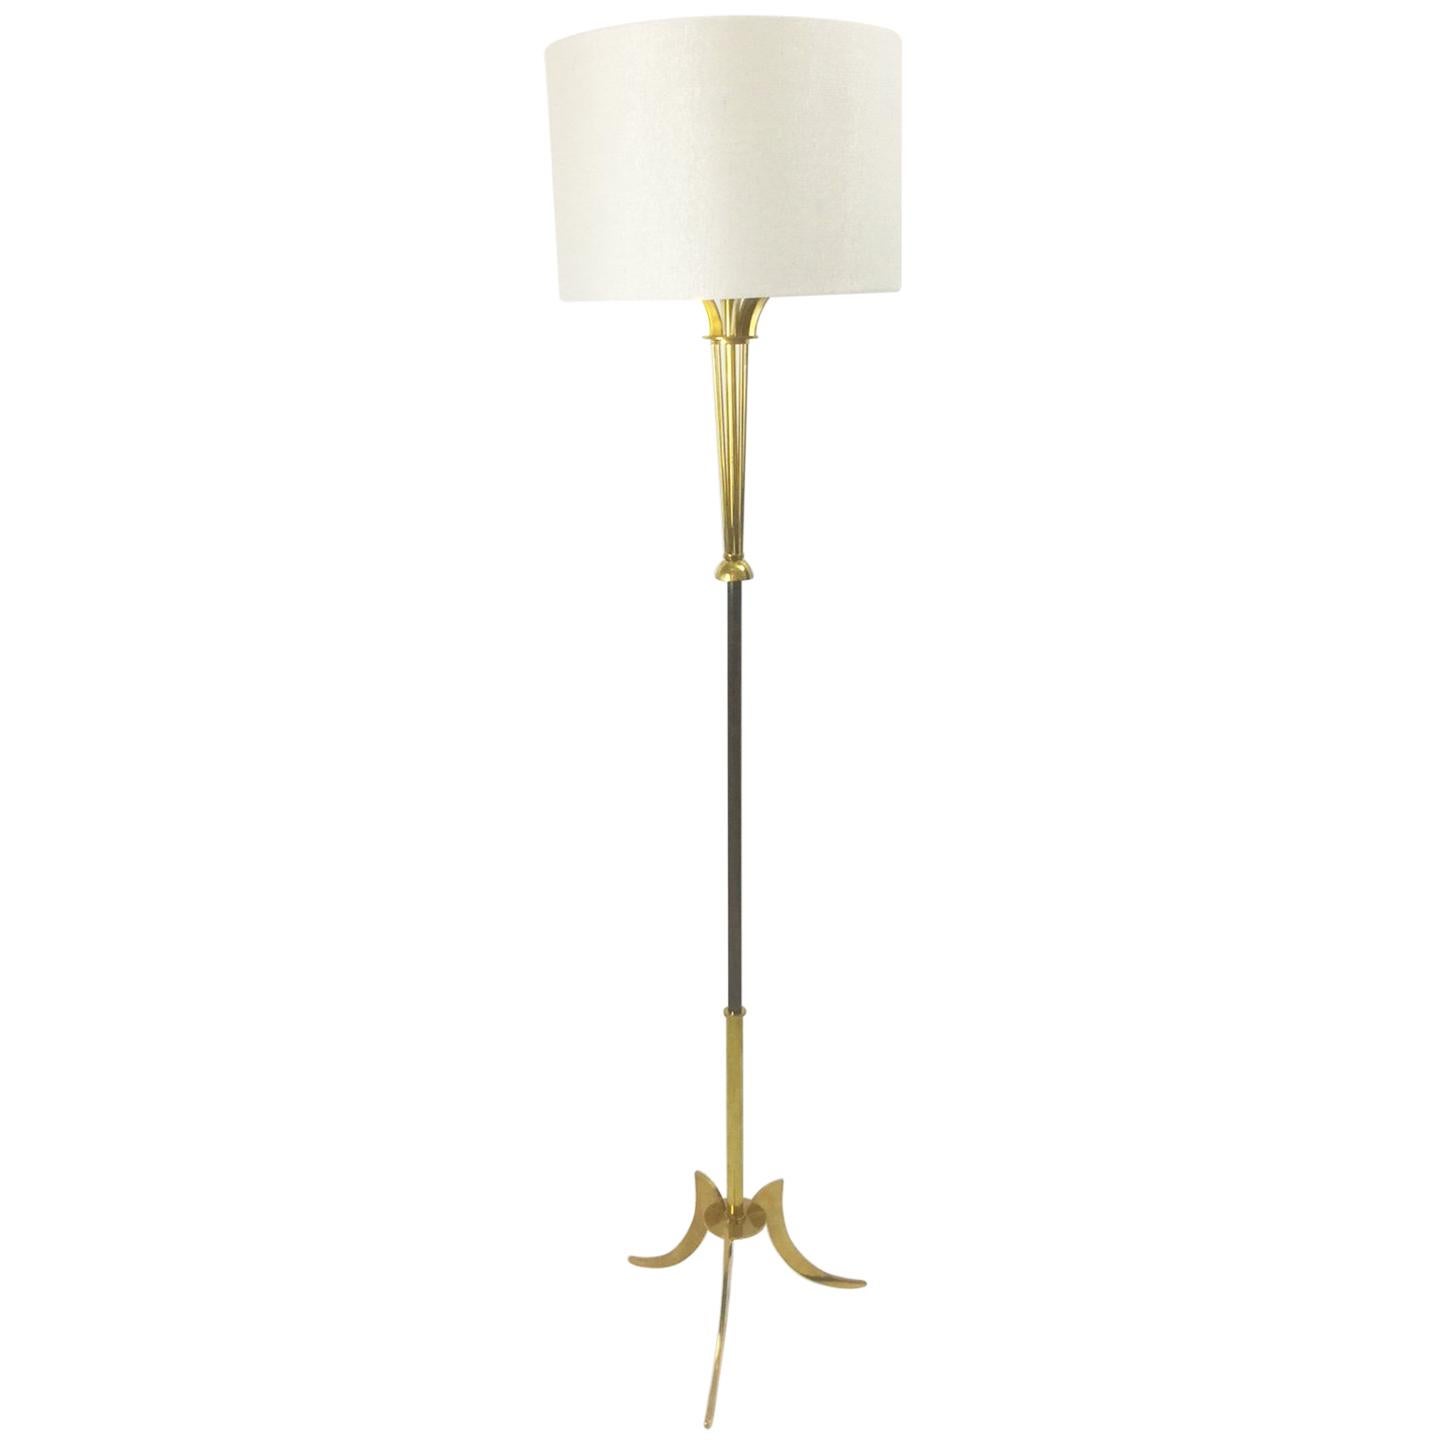 French Brass Floor Lamp Attributed to Maison Jansen, 1950s